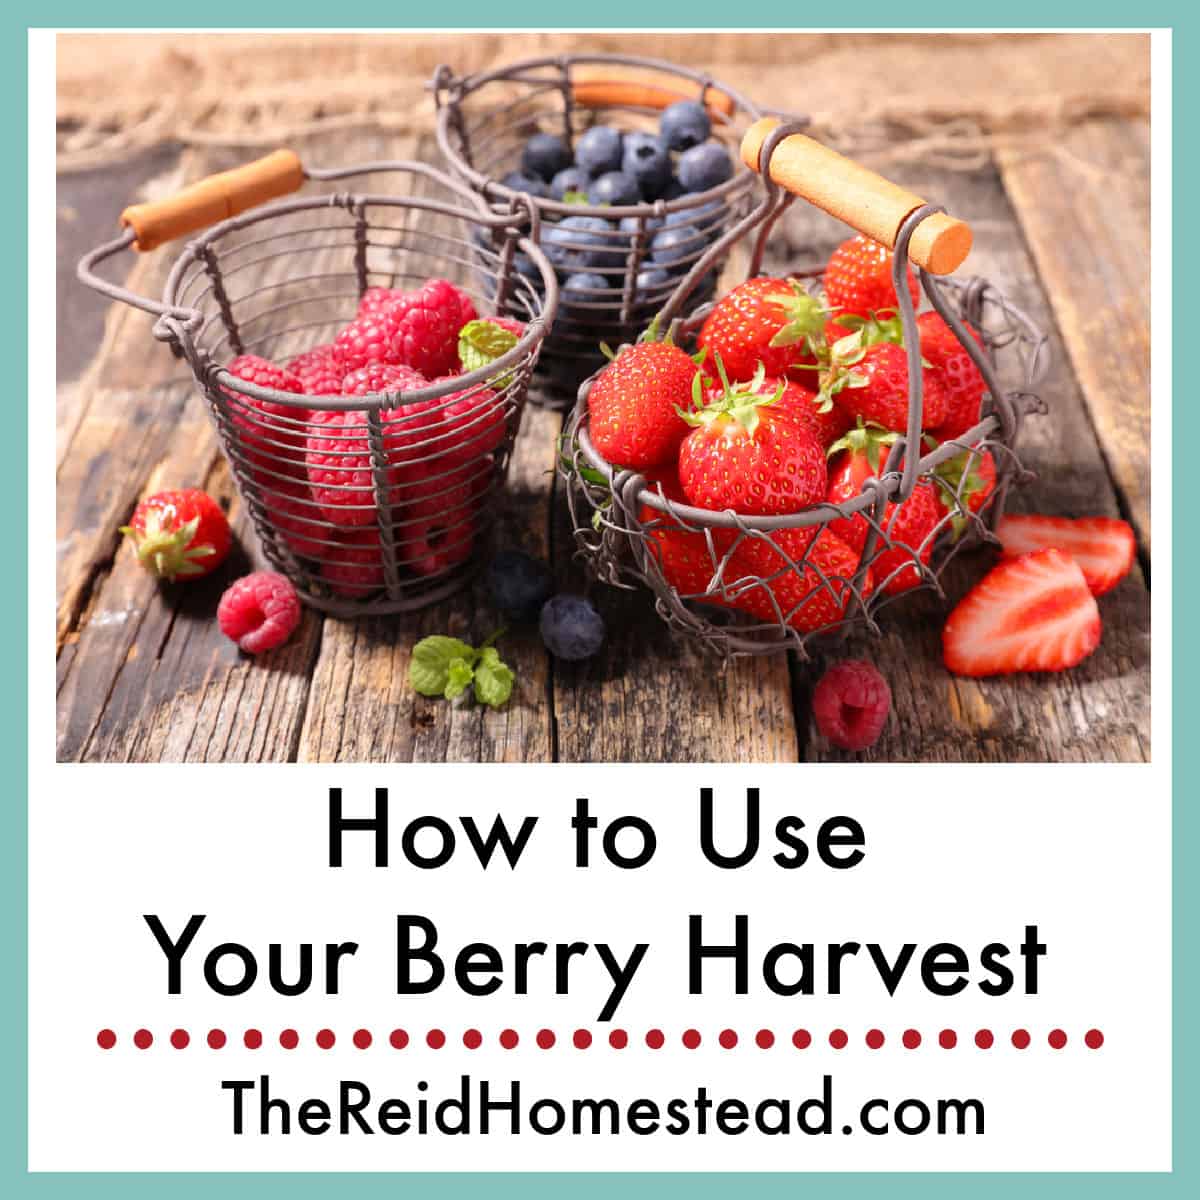 3 bowls one each full of raspberries, blueberries, strawberries with text overlay how to use your berry harvest